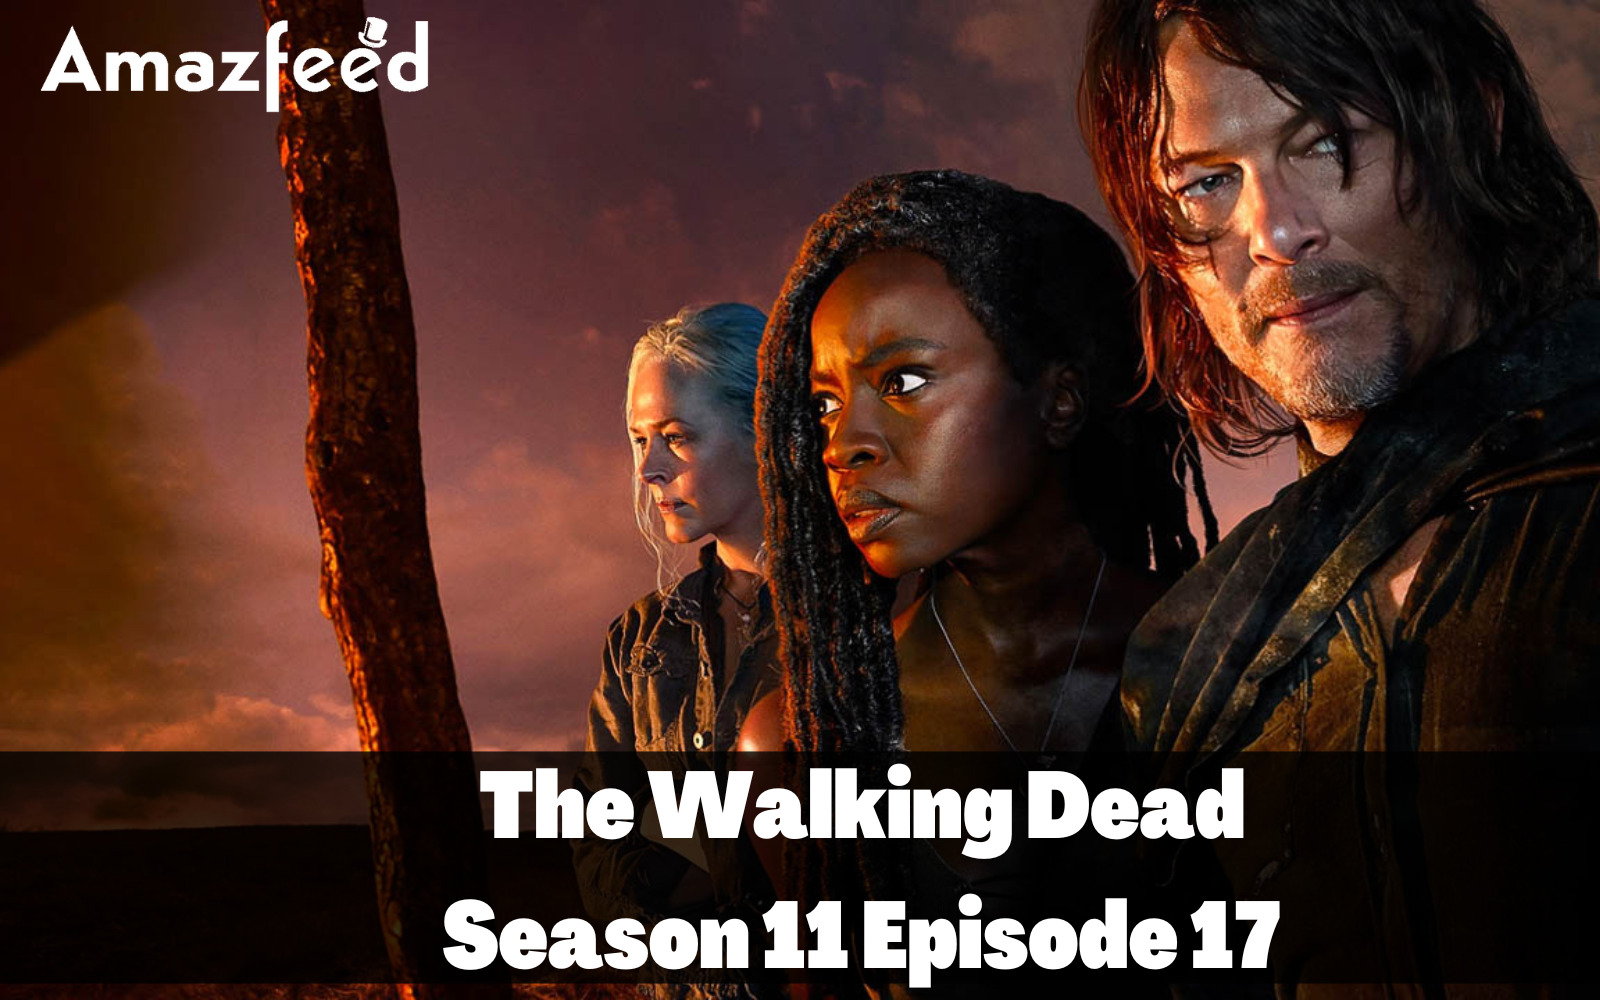 The Walking Dead Season 11 Episode 17 Expected Release date & time